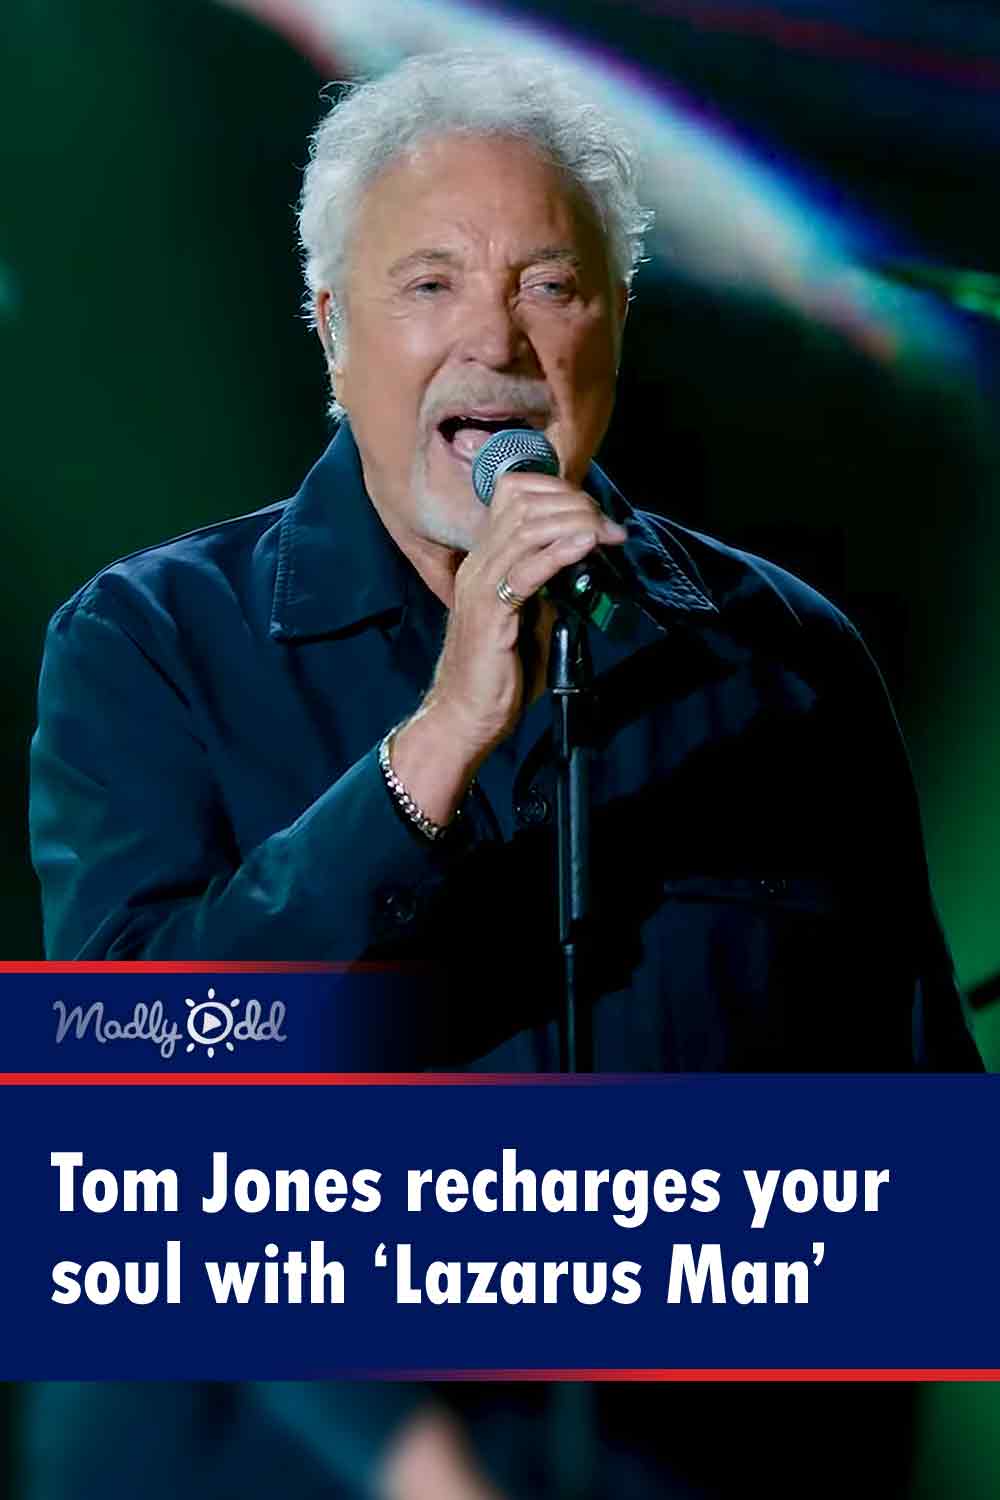 Tom Jones recharges your soul with ‘Lazarus Man’